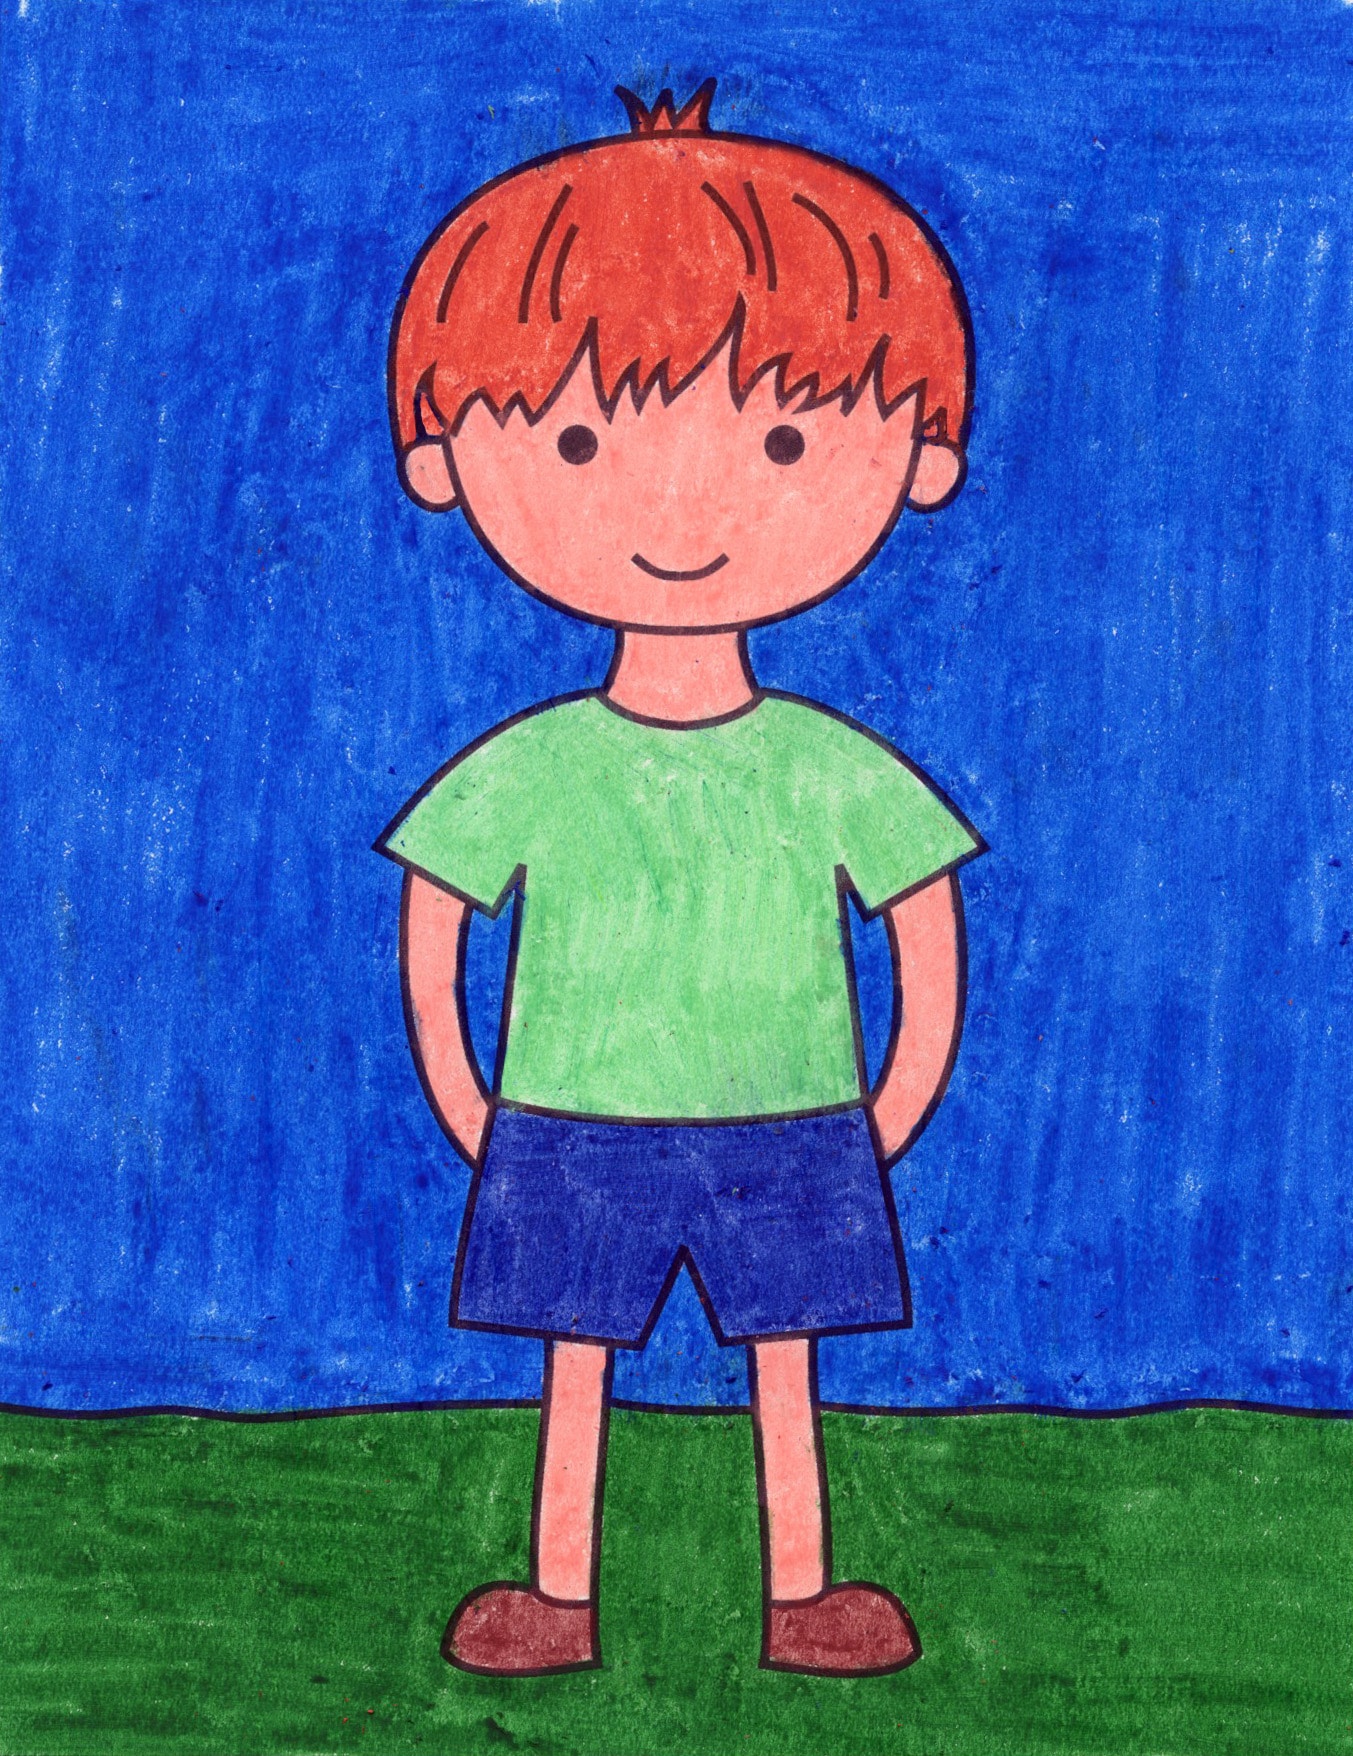 Easy How to Draw a Boy in Shorts Tutorial and Boy in Shorts Coloring Page